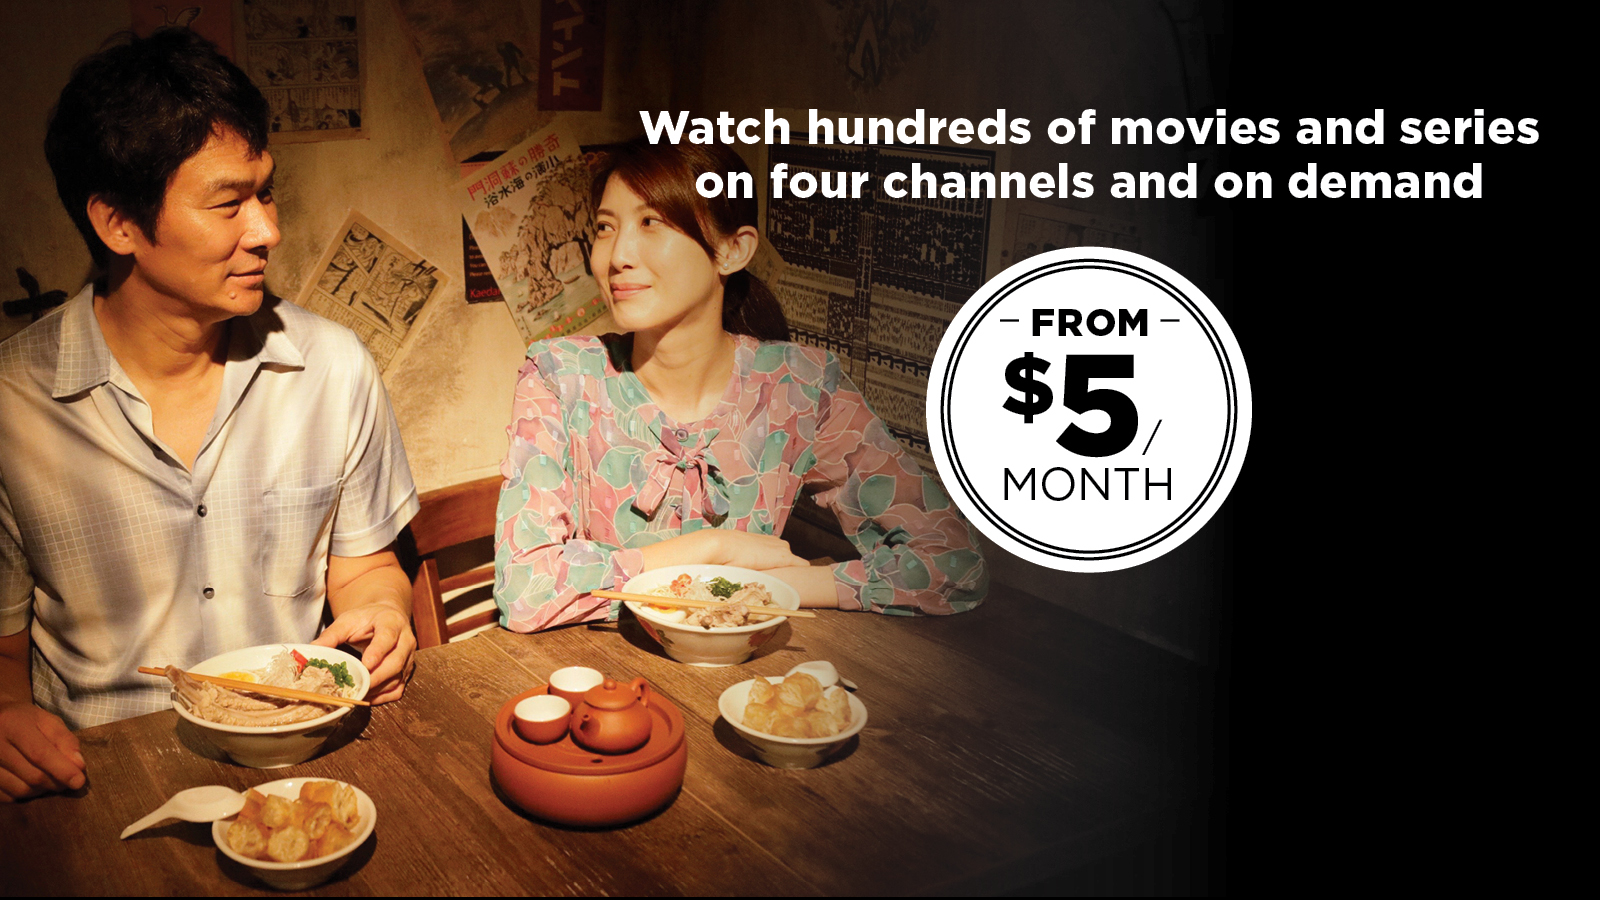 Watch hundreds of Movies and series on four channels and on demand from $5 a month